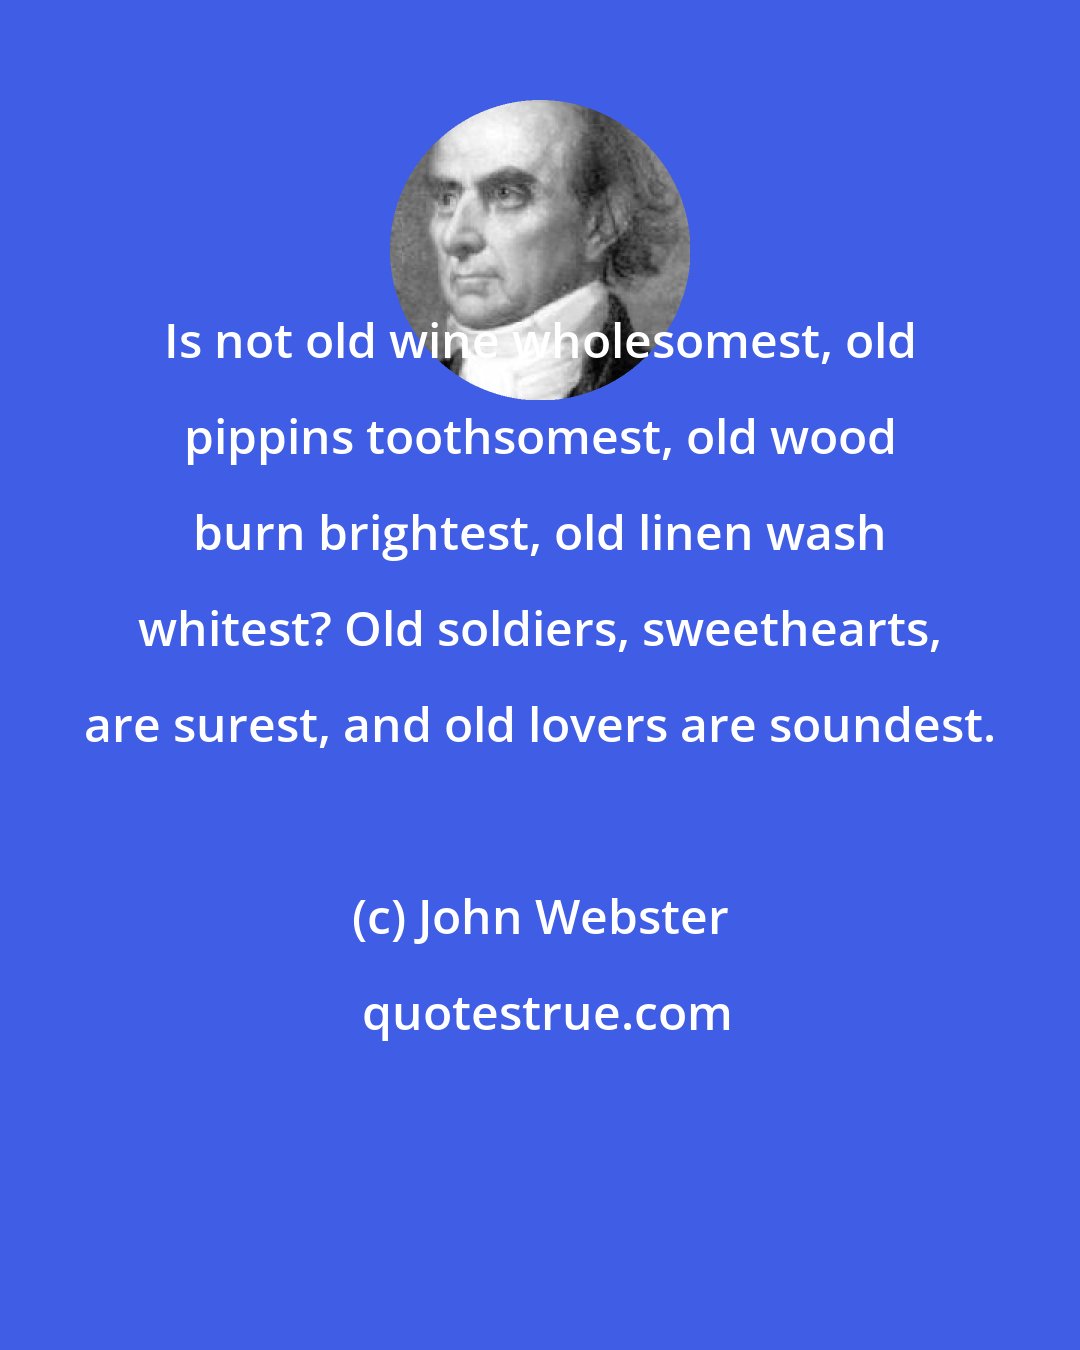 John Webster: Is not old wine wholesomest, old pippins toothsomest, old wood burn brightest, old linen wash whitest? Old soldiers, sweethearts, are surest, and old lovers are soundest.